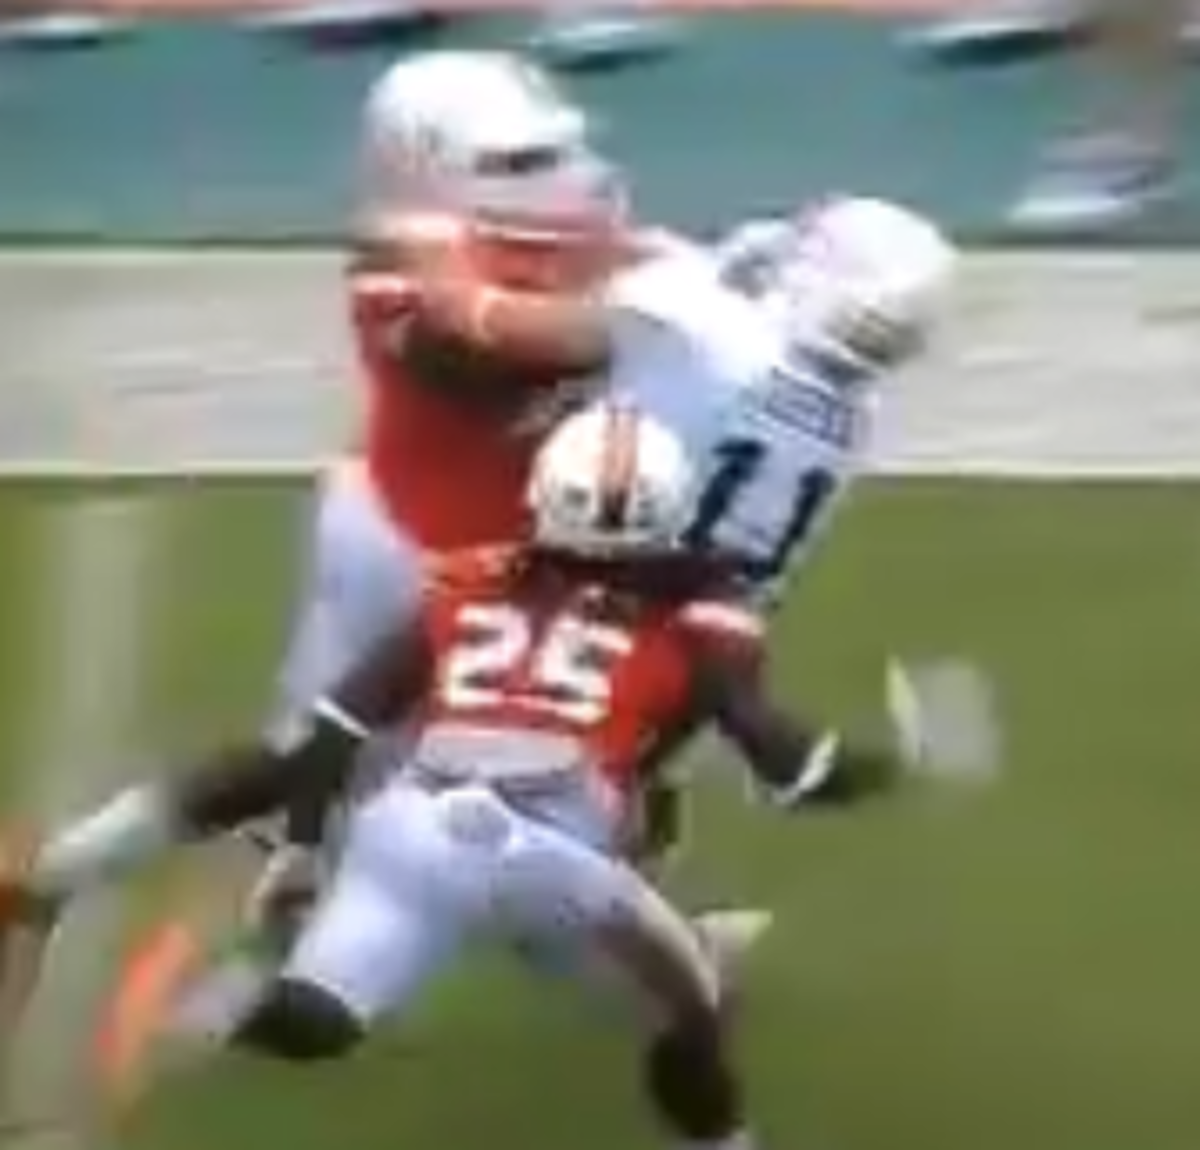 Miami player stiff arms a player to the ground.